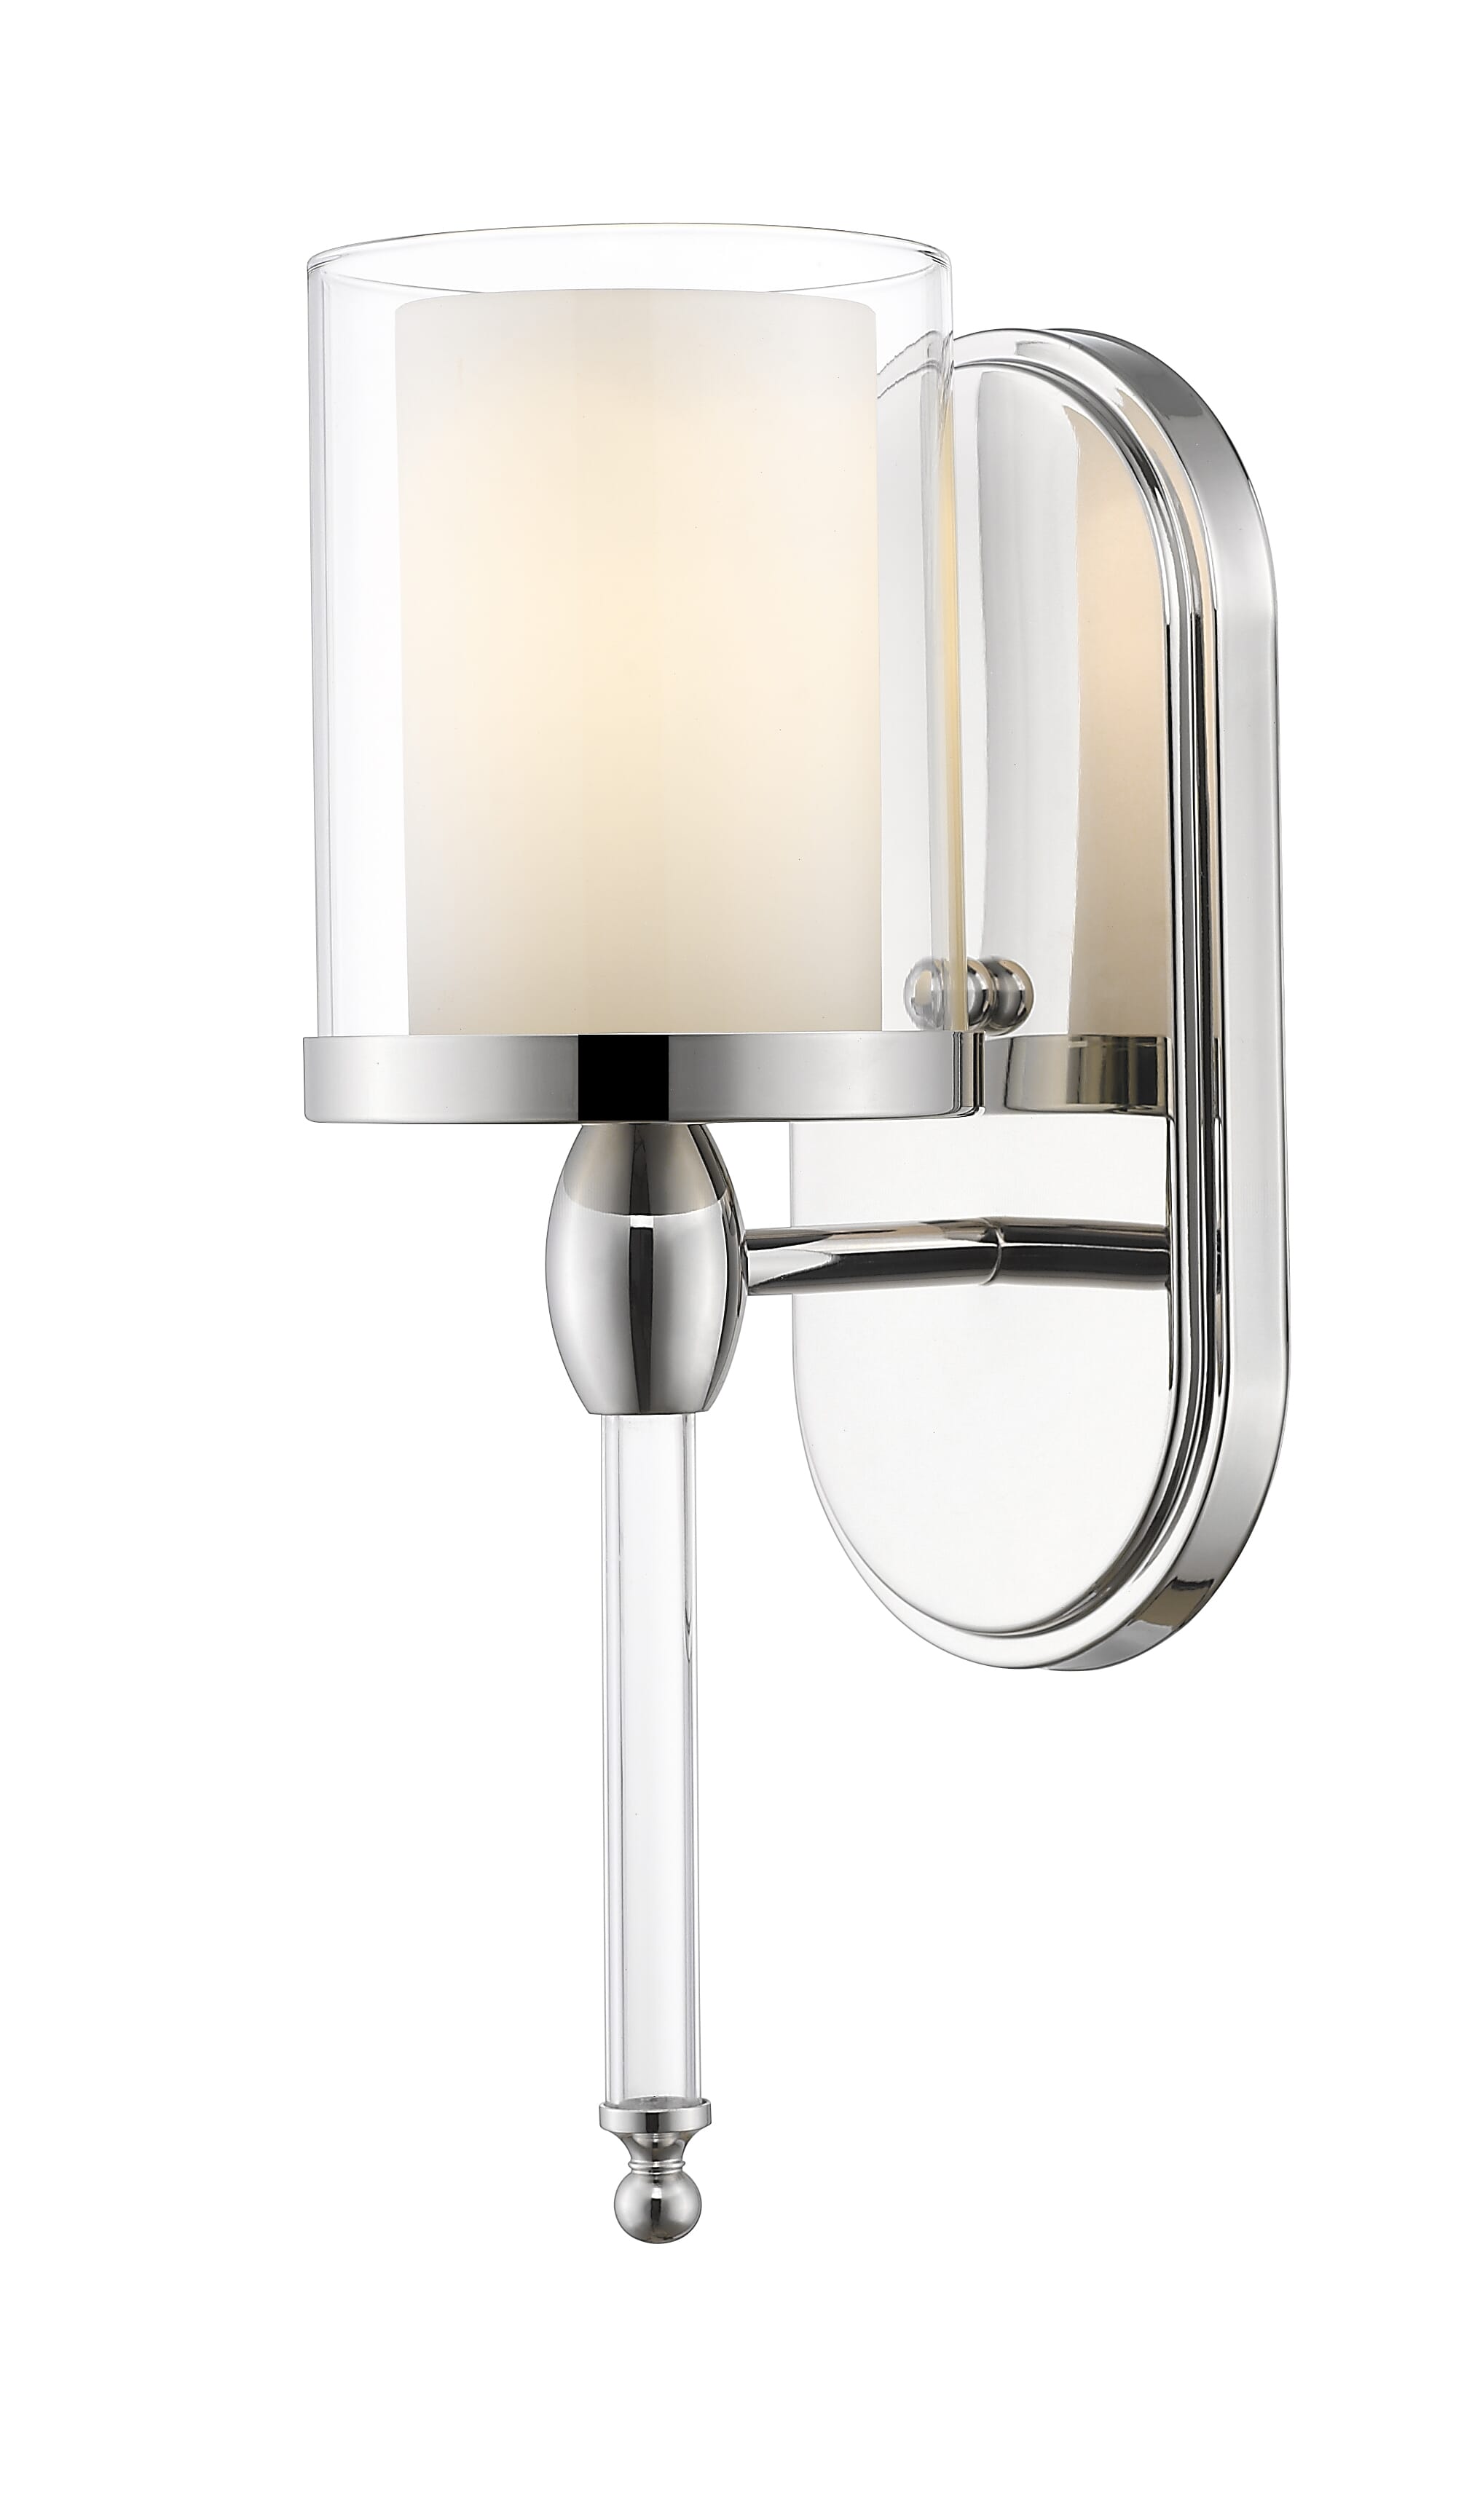 Argenta 1-Light Wall Sconce In Chrome